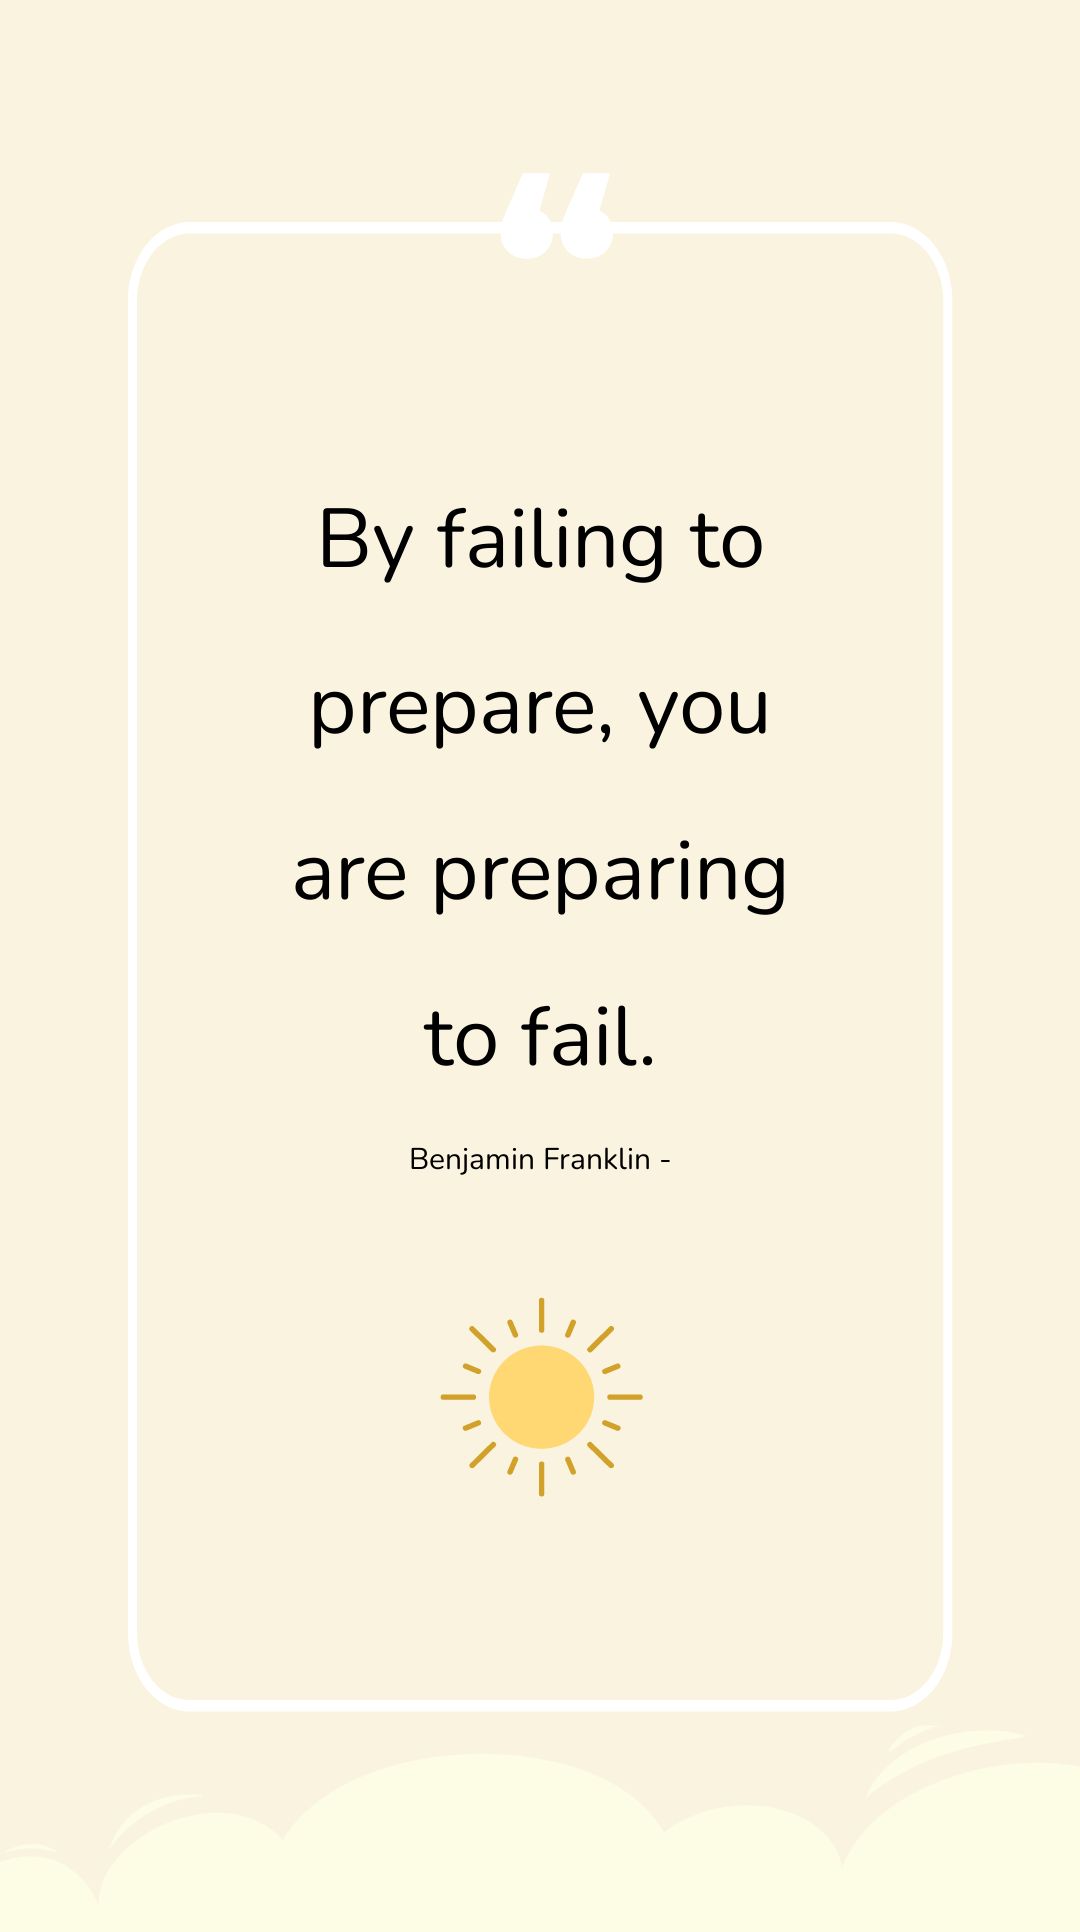 Benjamin Franklin - By failing to prepare, you are preparing to fail.